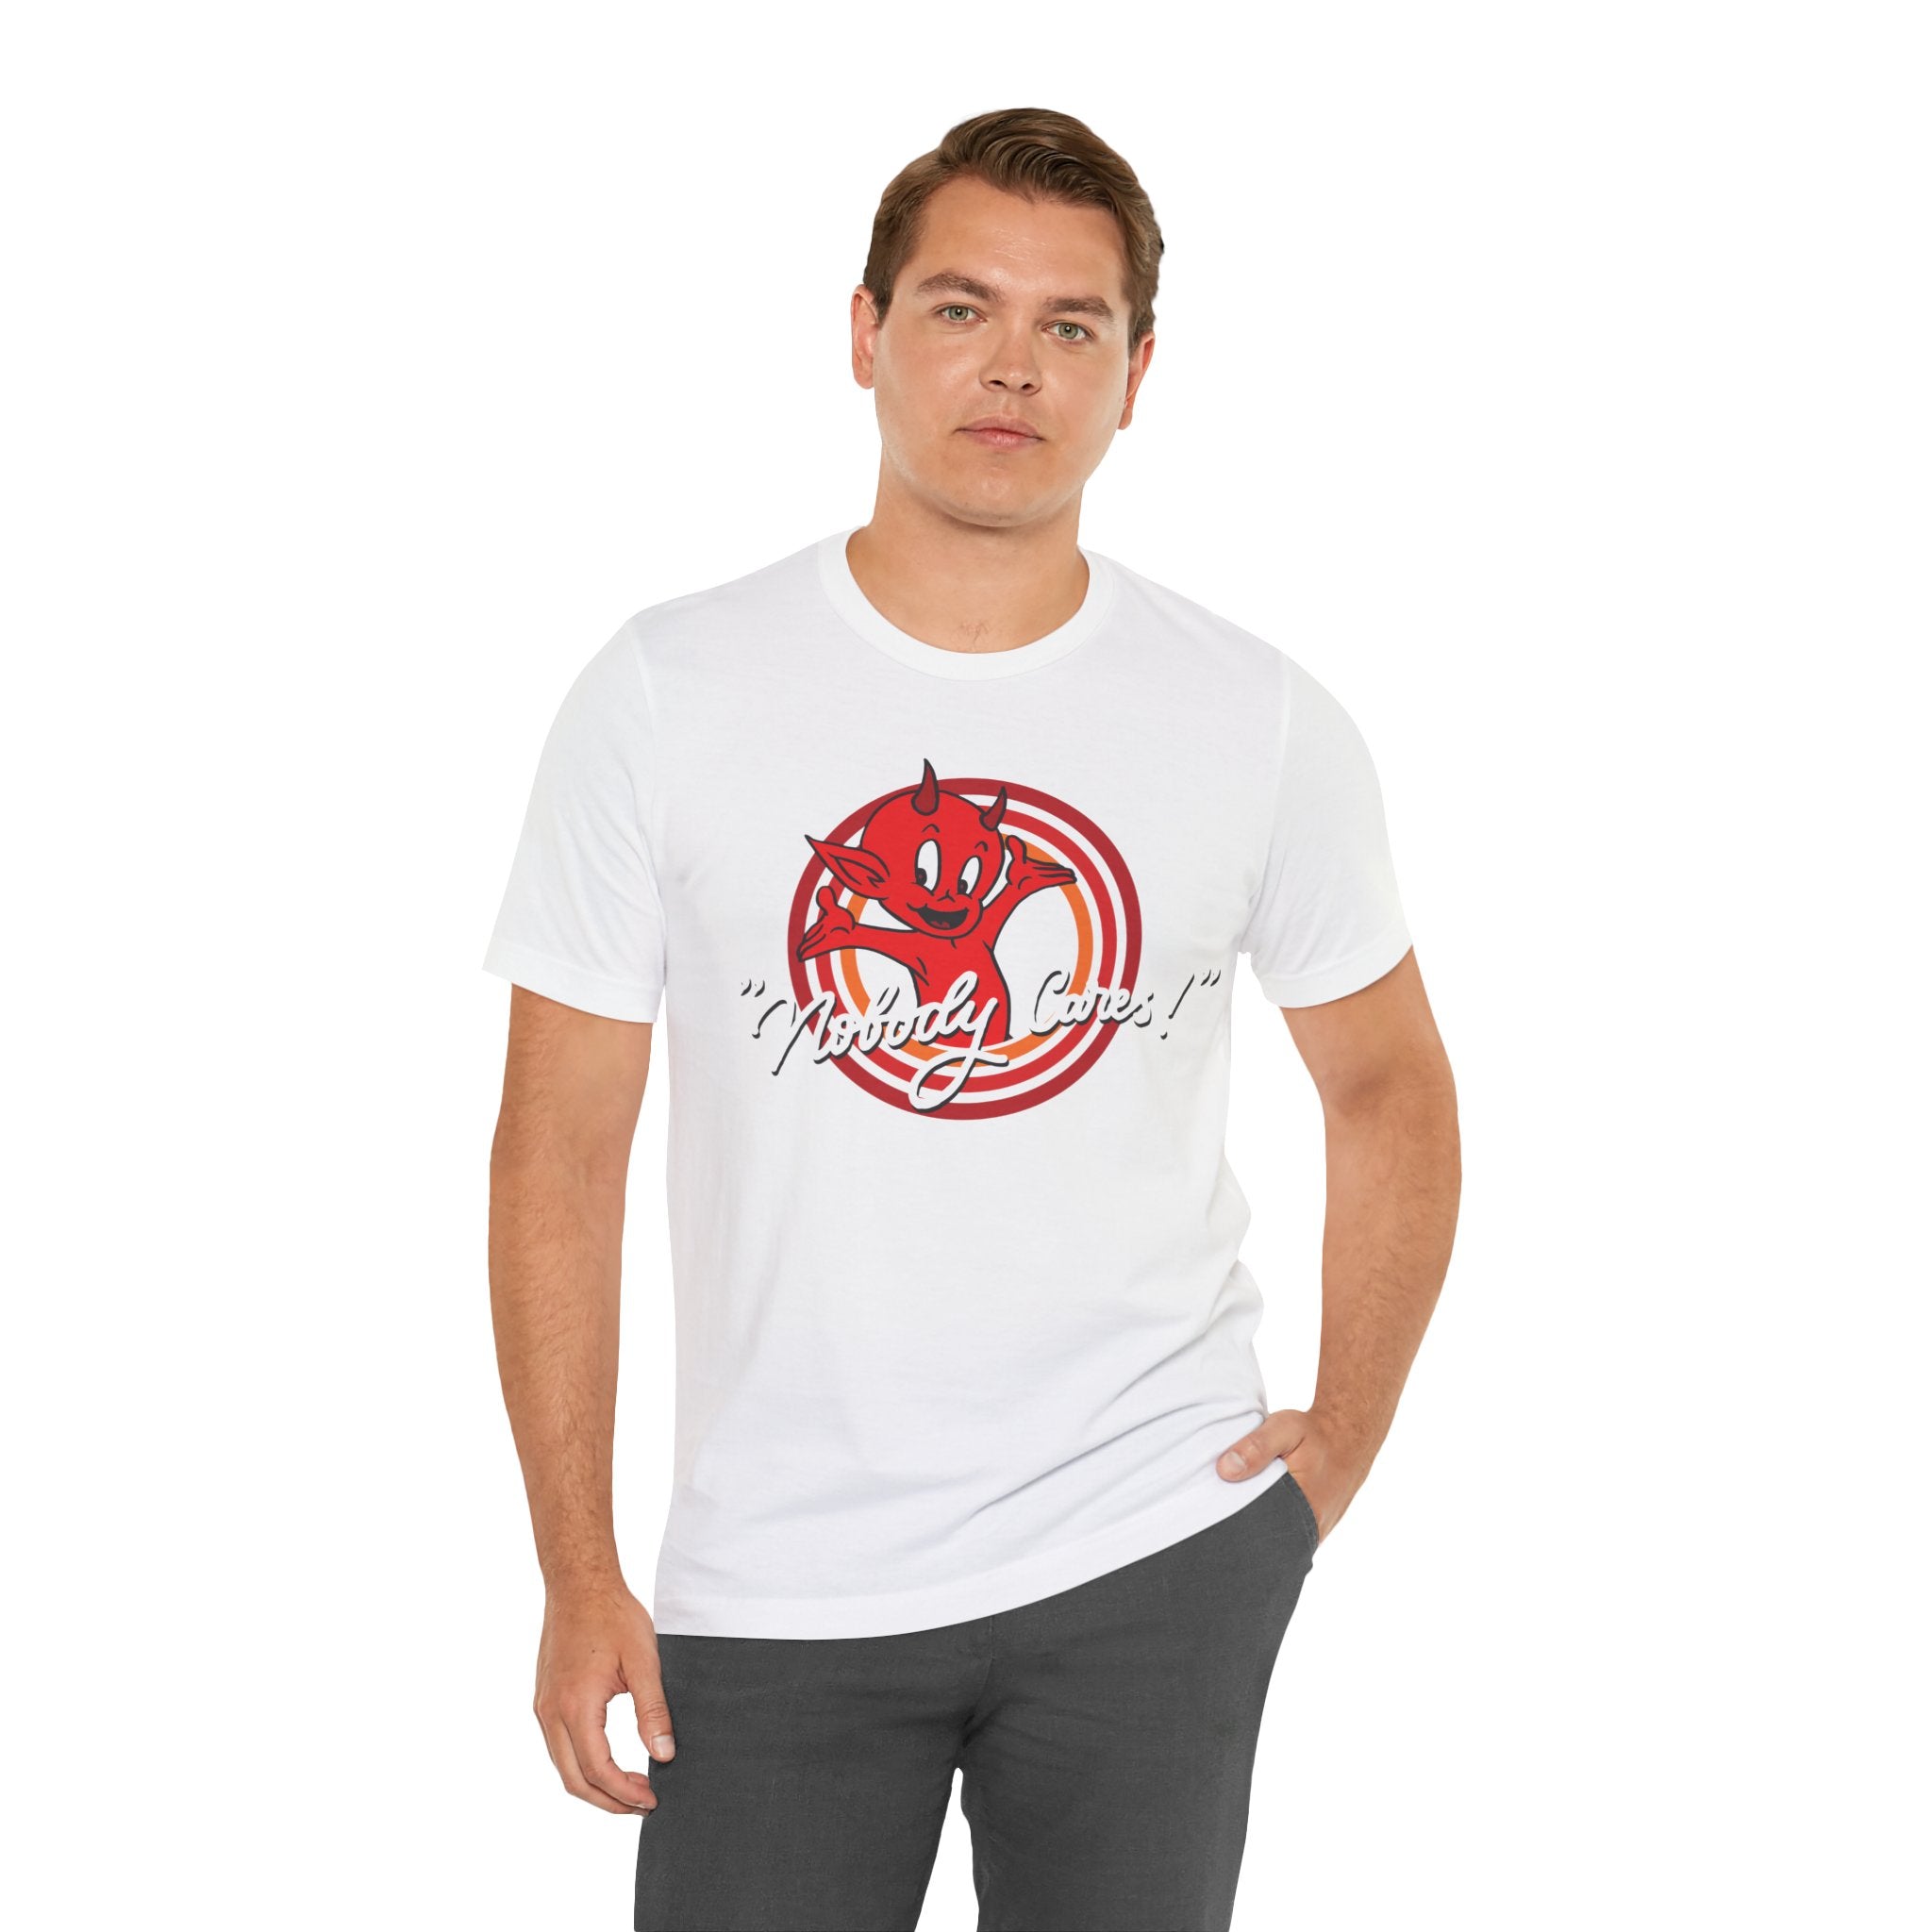 Man in a Nobody Cares jersey tee with a red dragon design and the text "mythical games" standing against a white background.